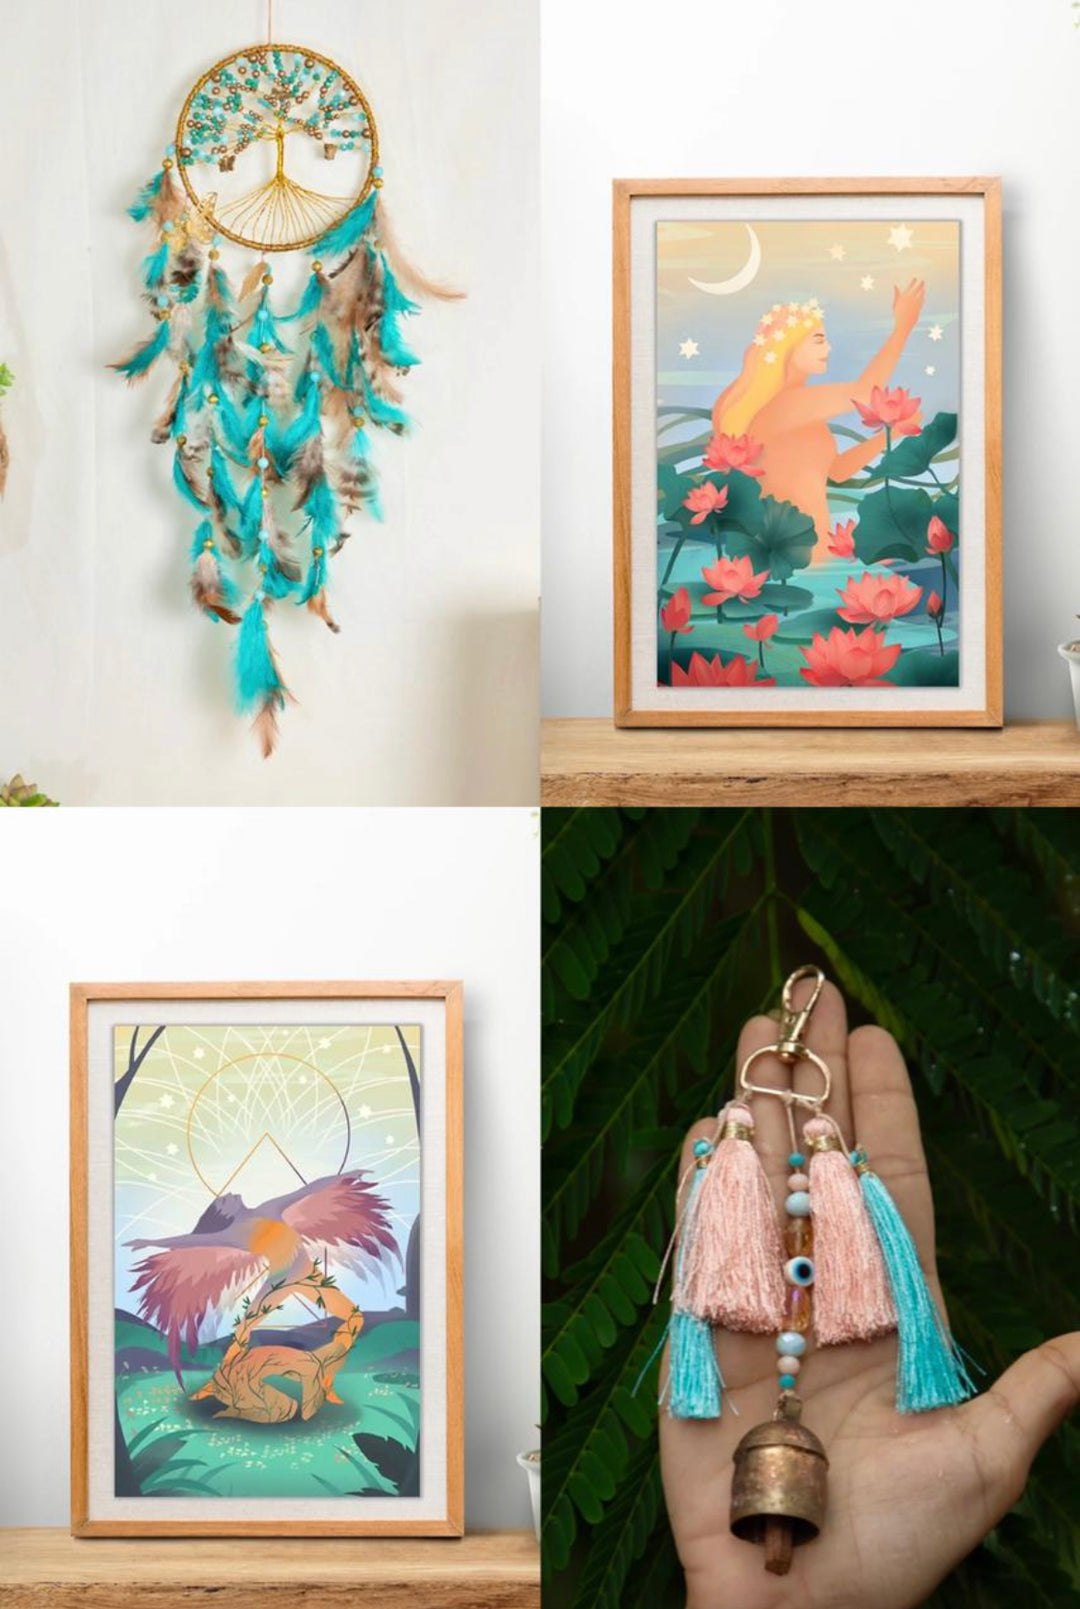 Gentle windchime keychain + Turquoise tree of life + New vision art print for charity + Creativity art print for charity   - Comb